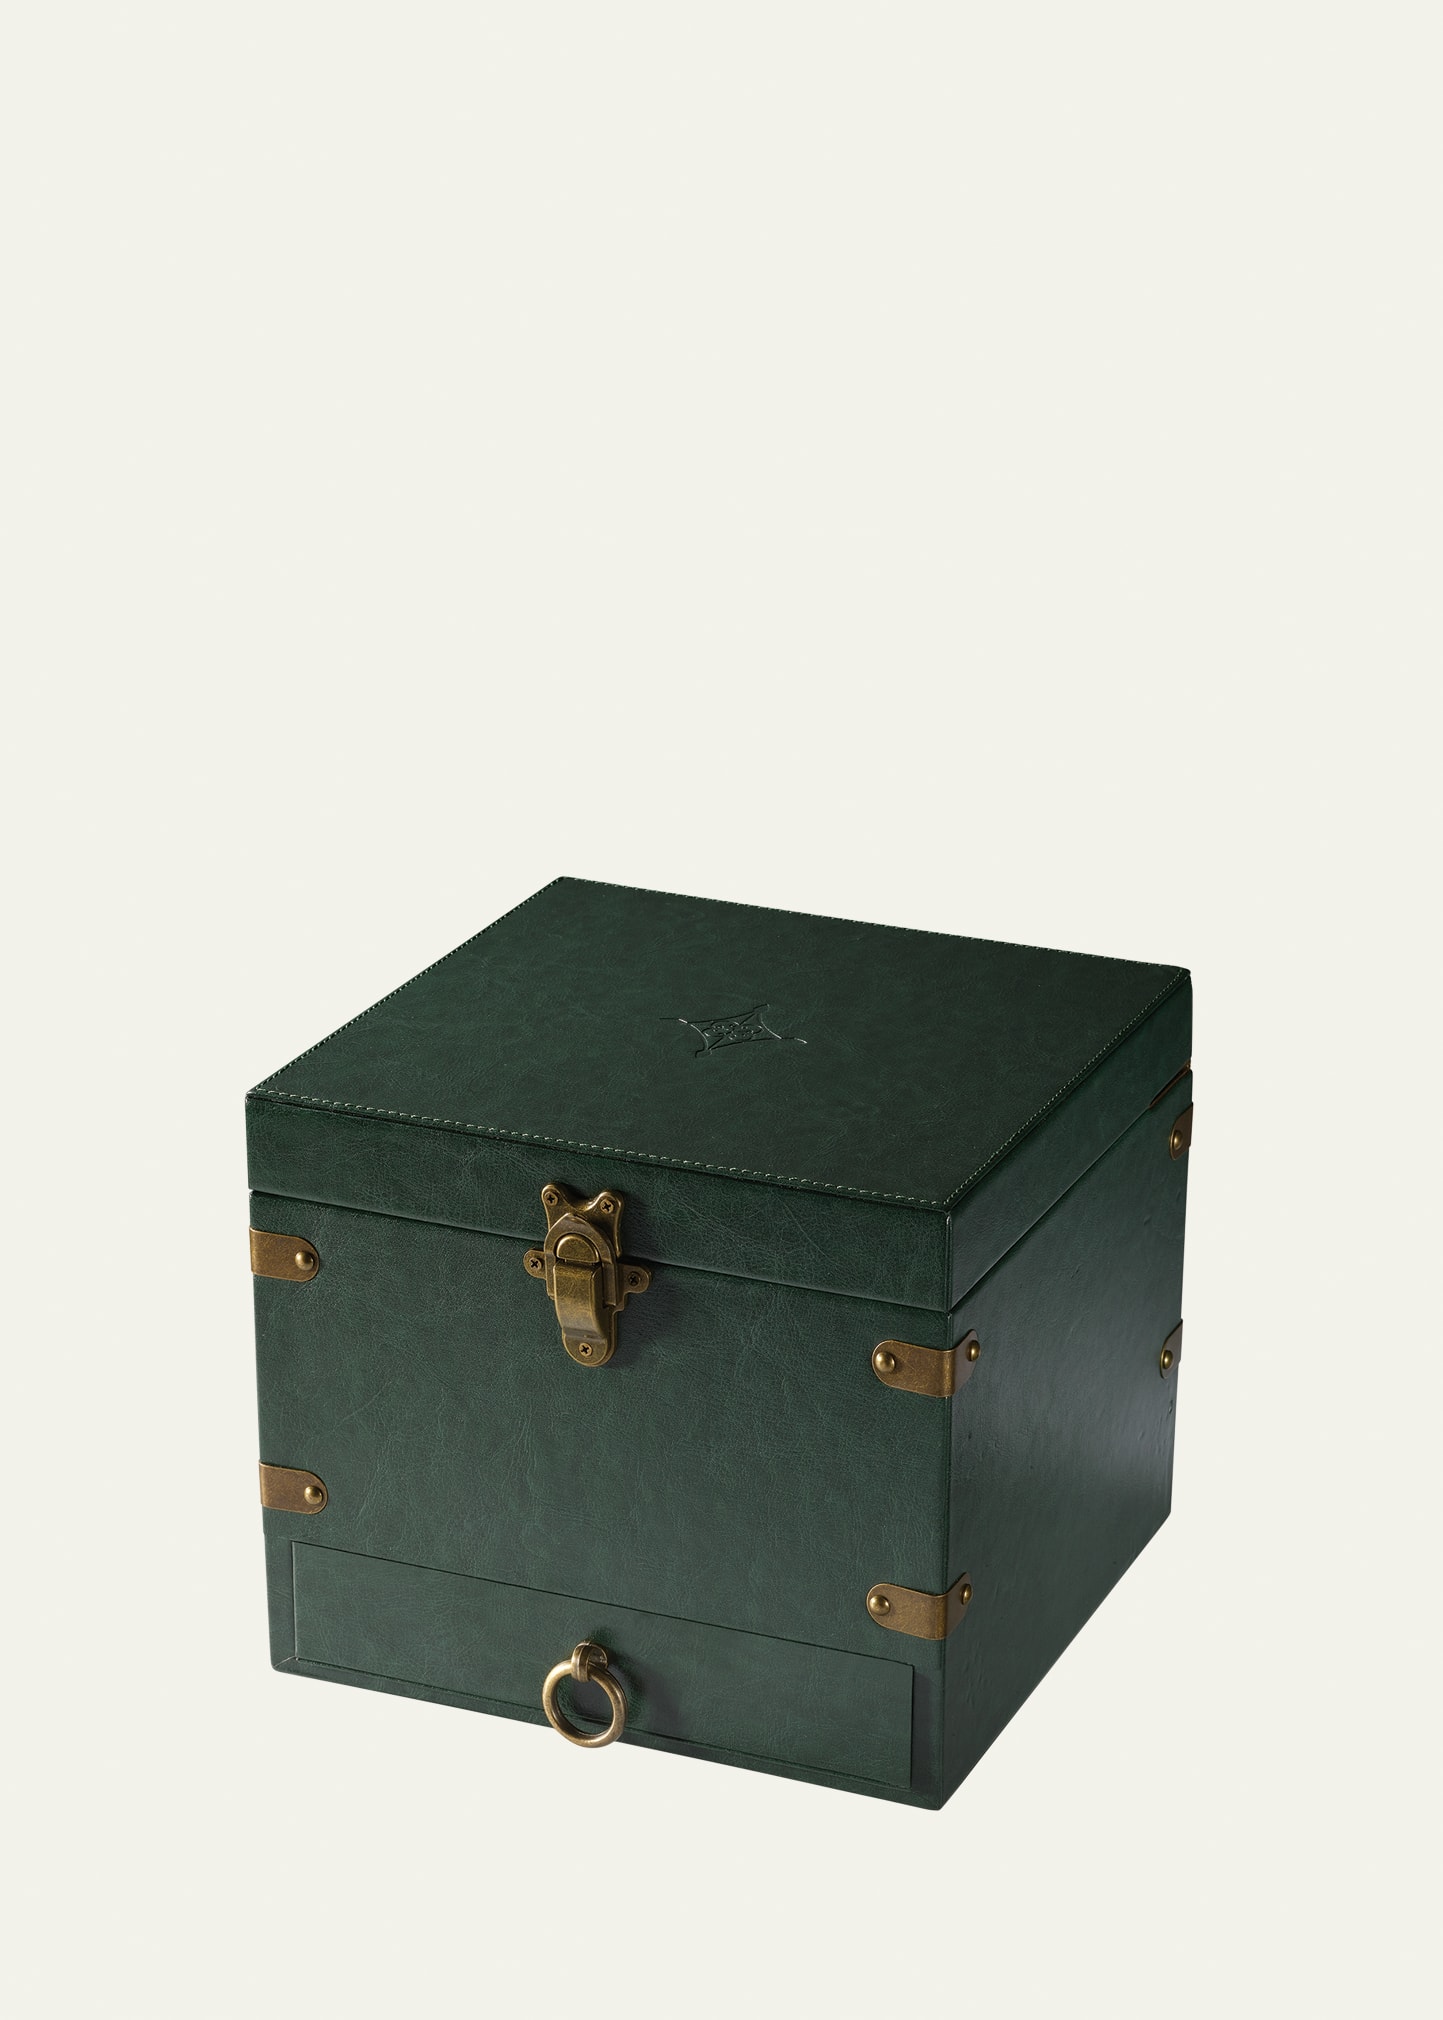 The Large Maker Trunk